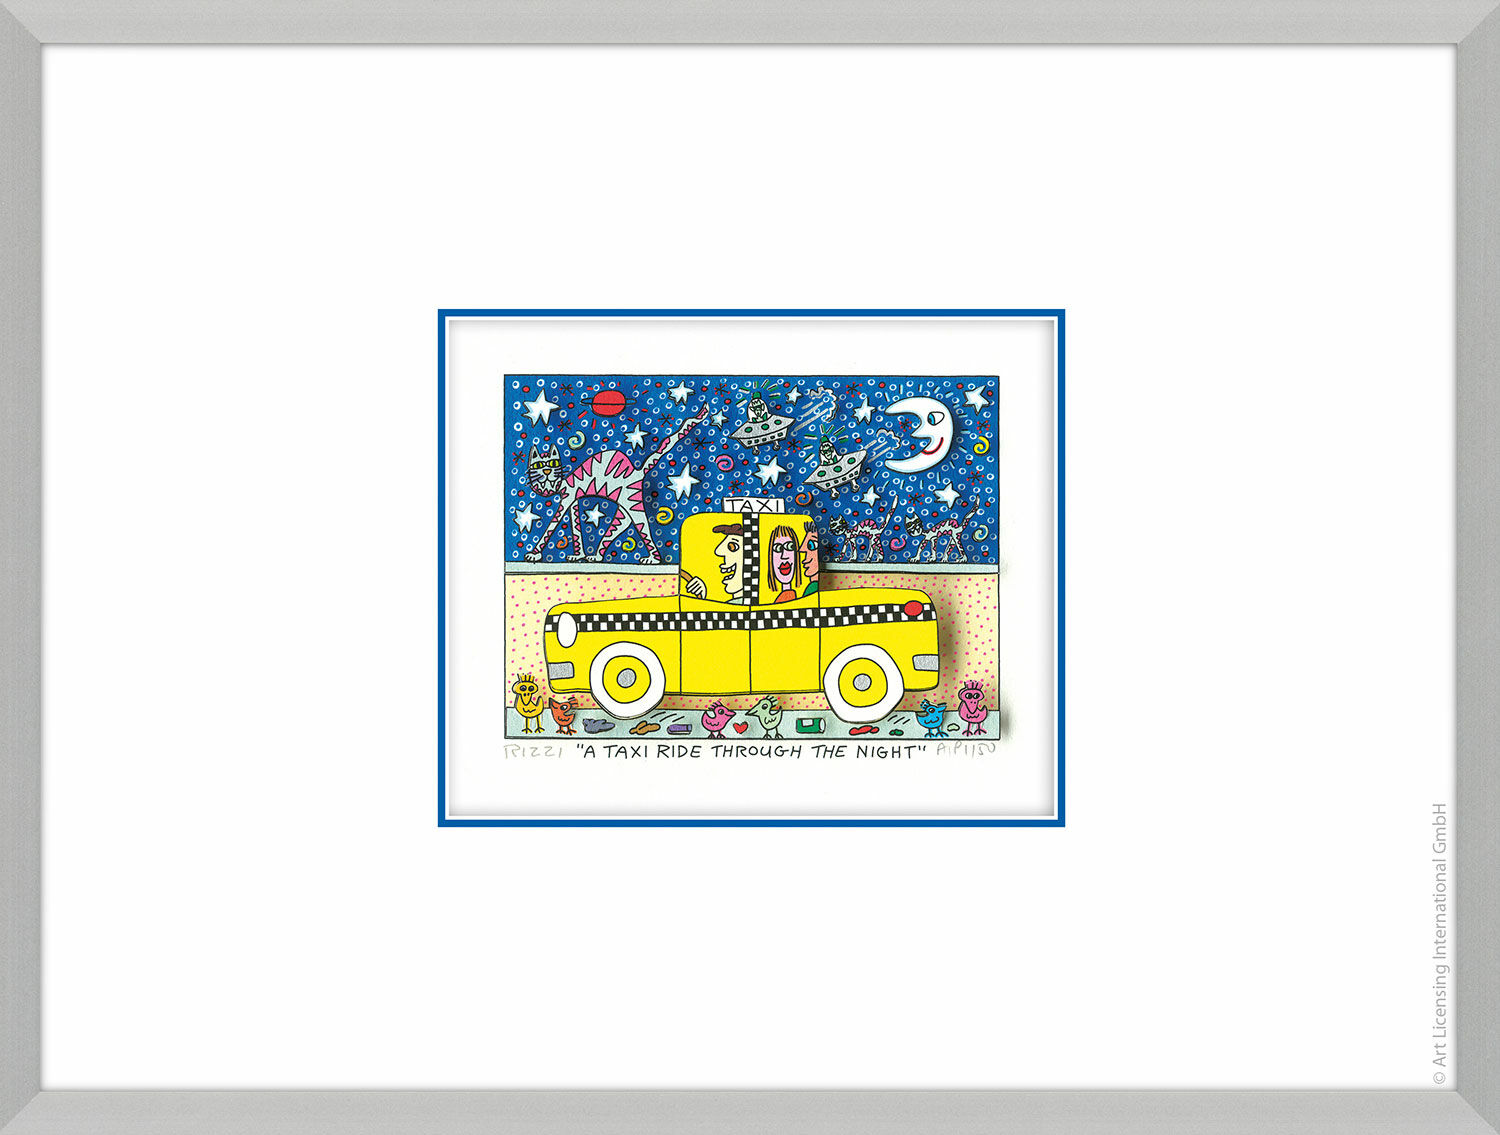 3D Picture "A Taxi Ride Through the Night" (2019), framed by James Rizzi